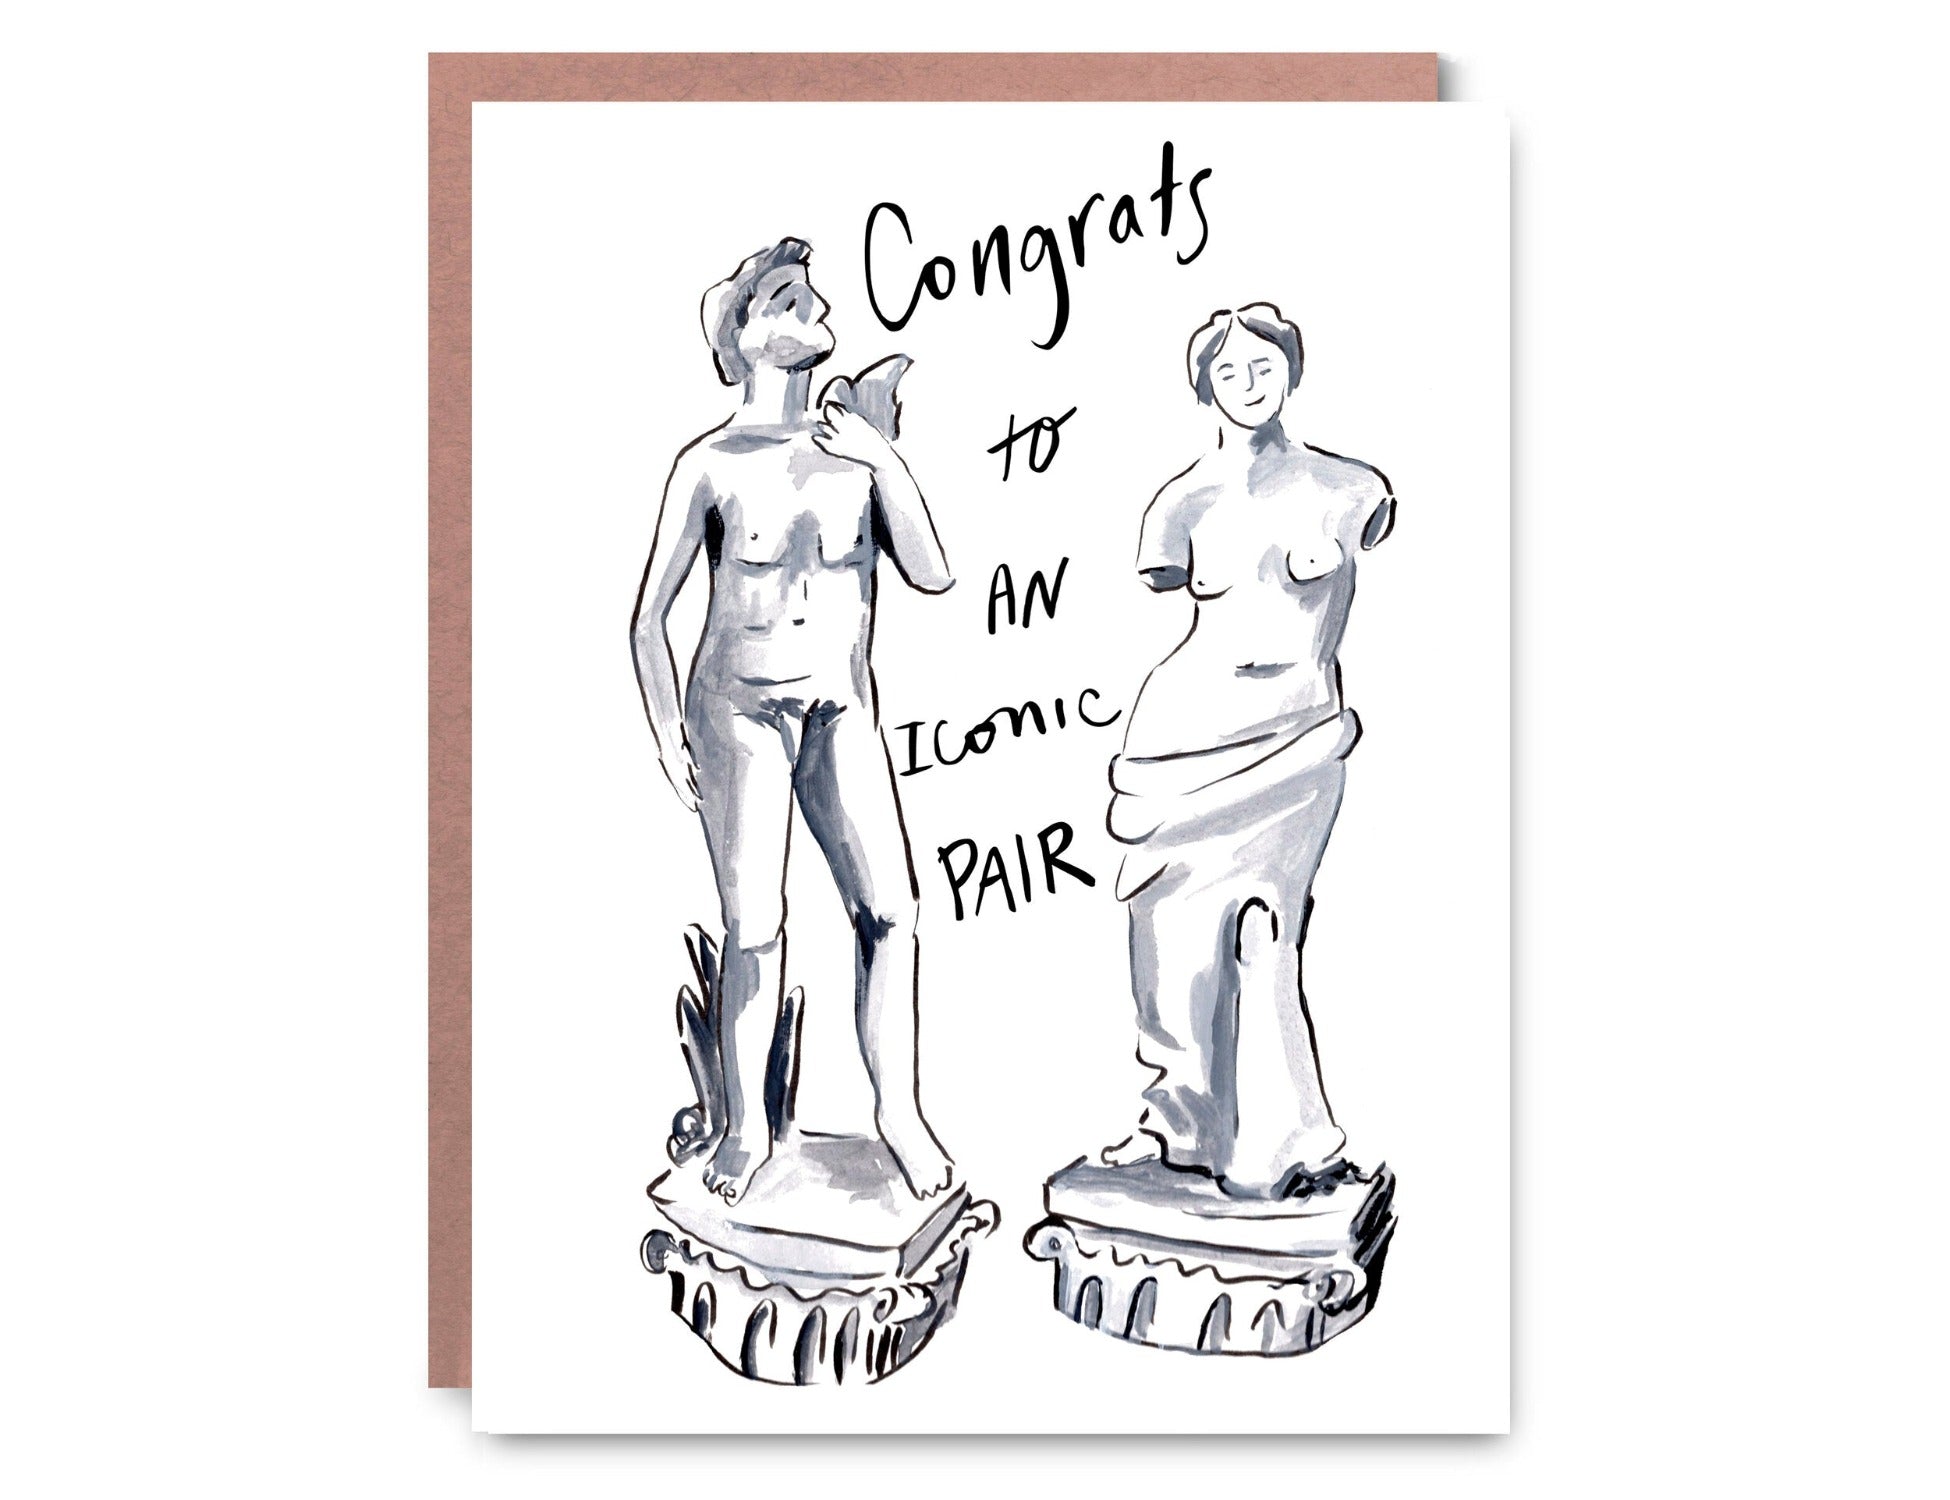 "Congrats to an Iconic Pair" Card